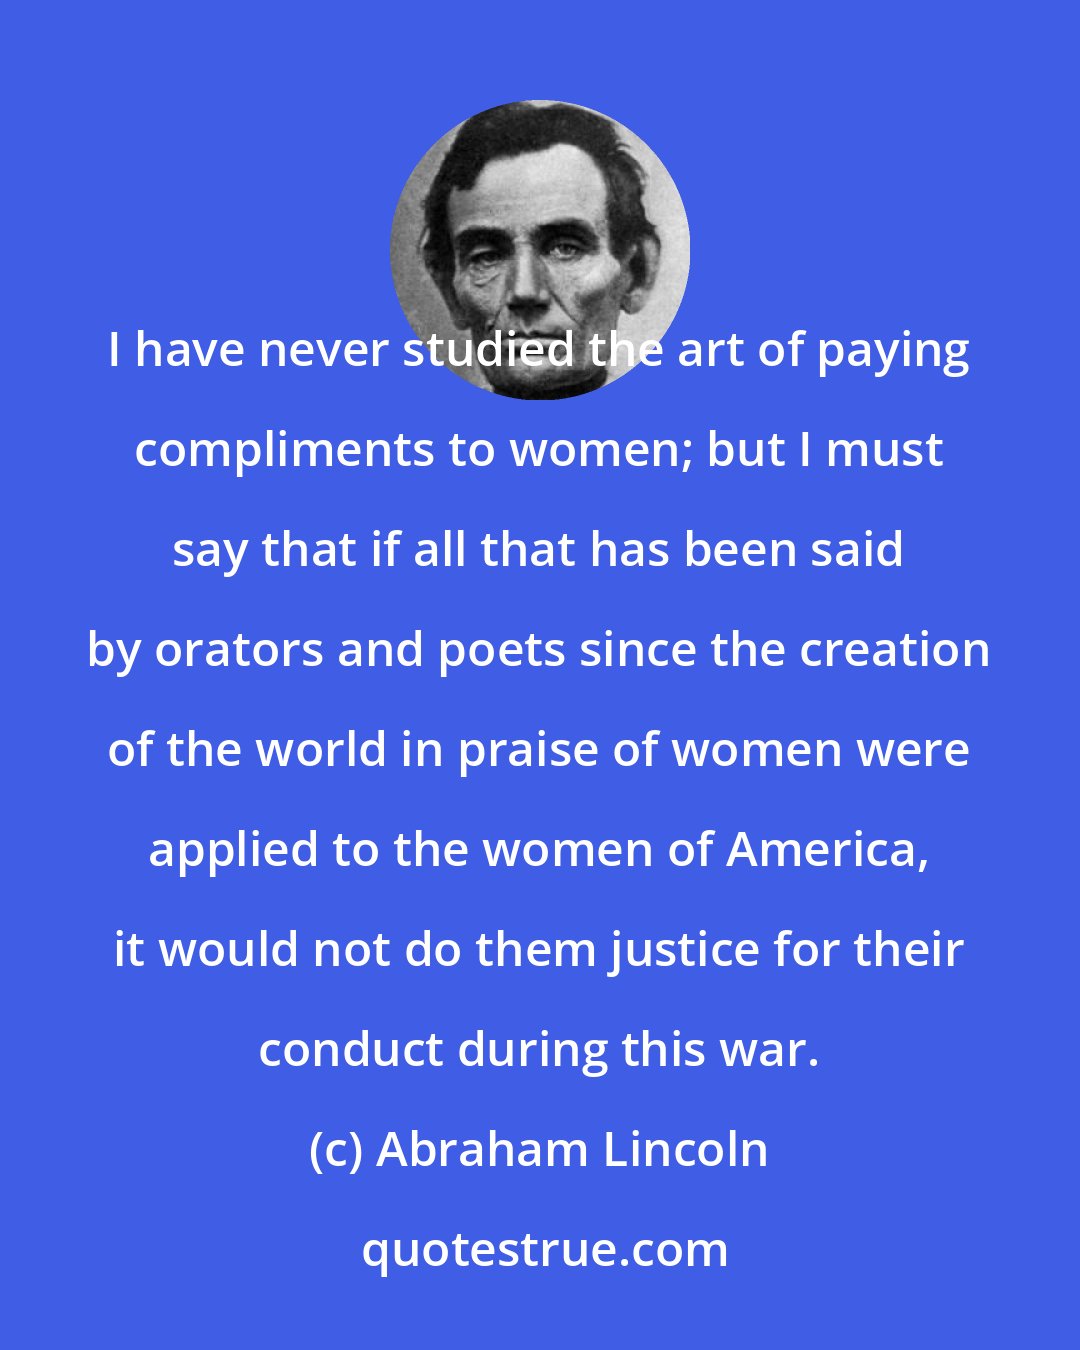 Abraham Lincoln: I have never studied the art of paying compliments to women; but I must say that if all that has been said by orators and poets since the creation of the world in praise of women were applied to the women of America, it would not do them justice for their conduct during this war.